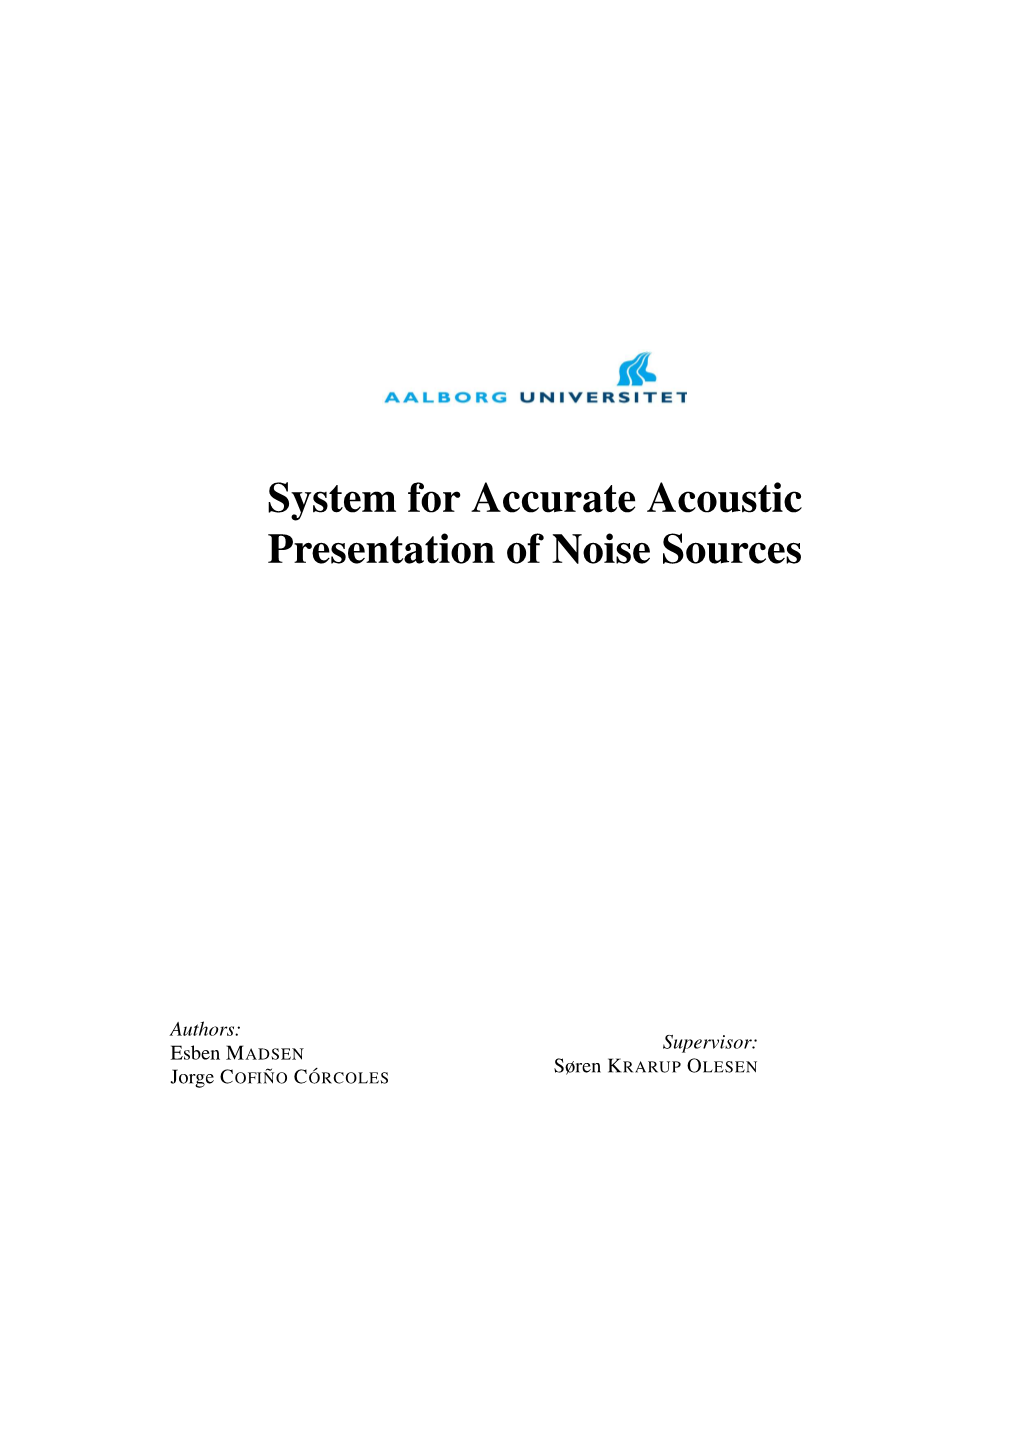 System for Accurate Acoustic Presentation of Noise Sources